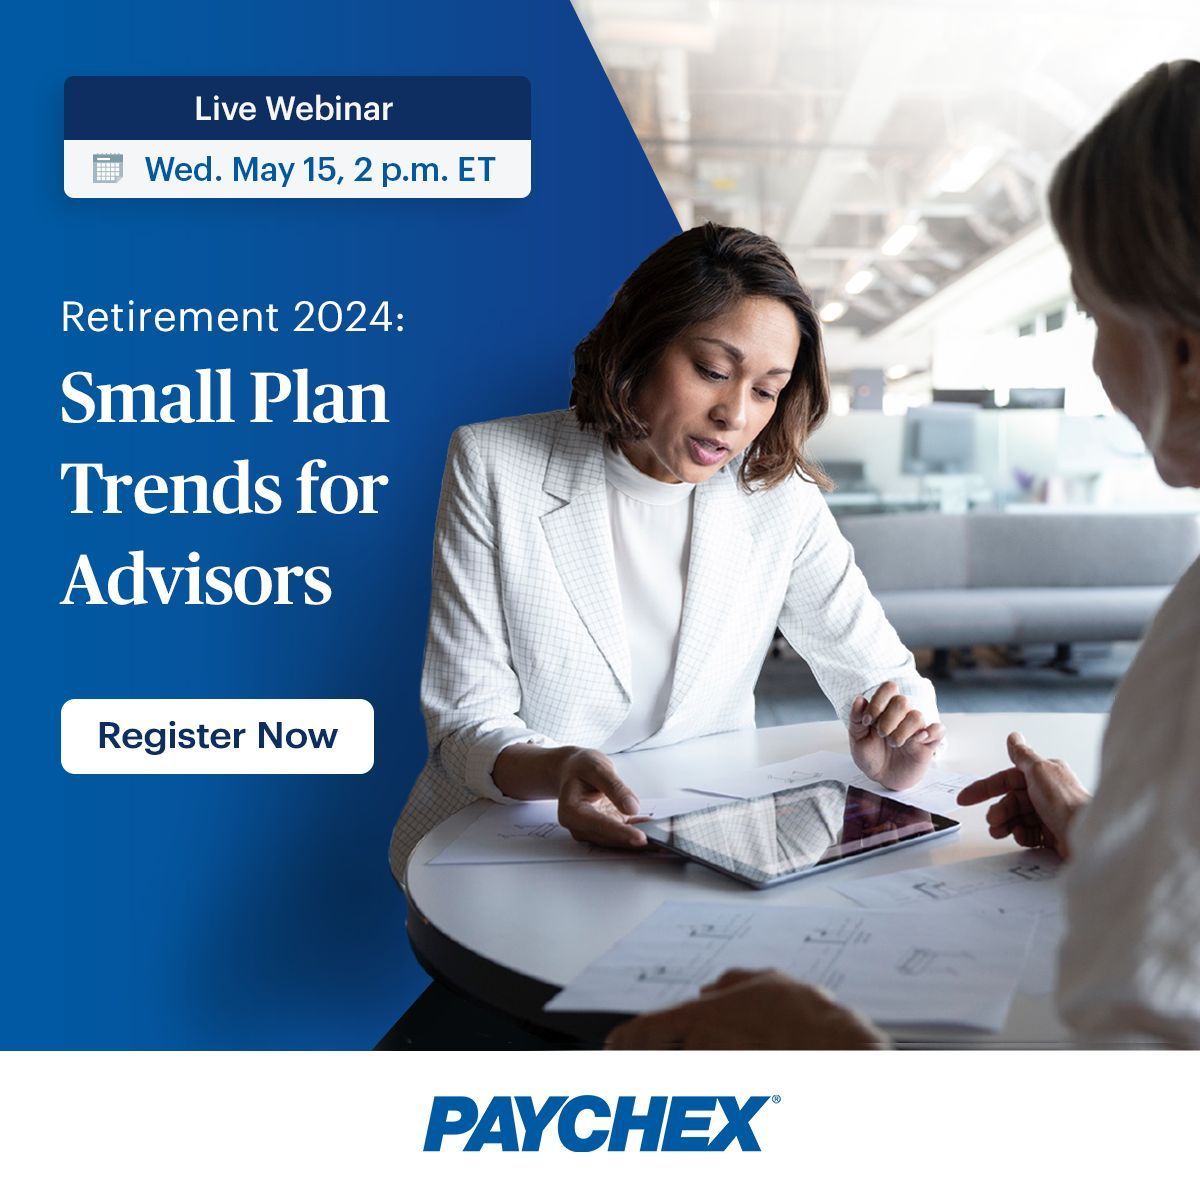 Financial advisors, did you know that more small businesses are starting 401(k) plans than ever before? In this webinar, we’ll share insights from our latest retirement survey and show you how small-asset plans can help you grow your firm. buff.ly/3Q5nDXF #401k